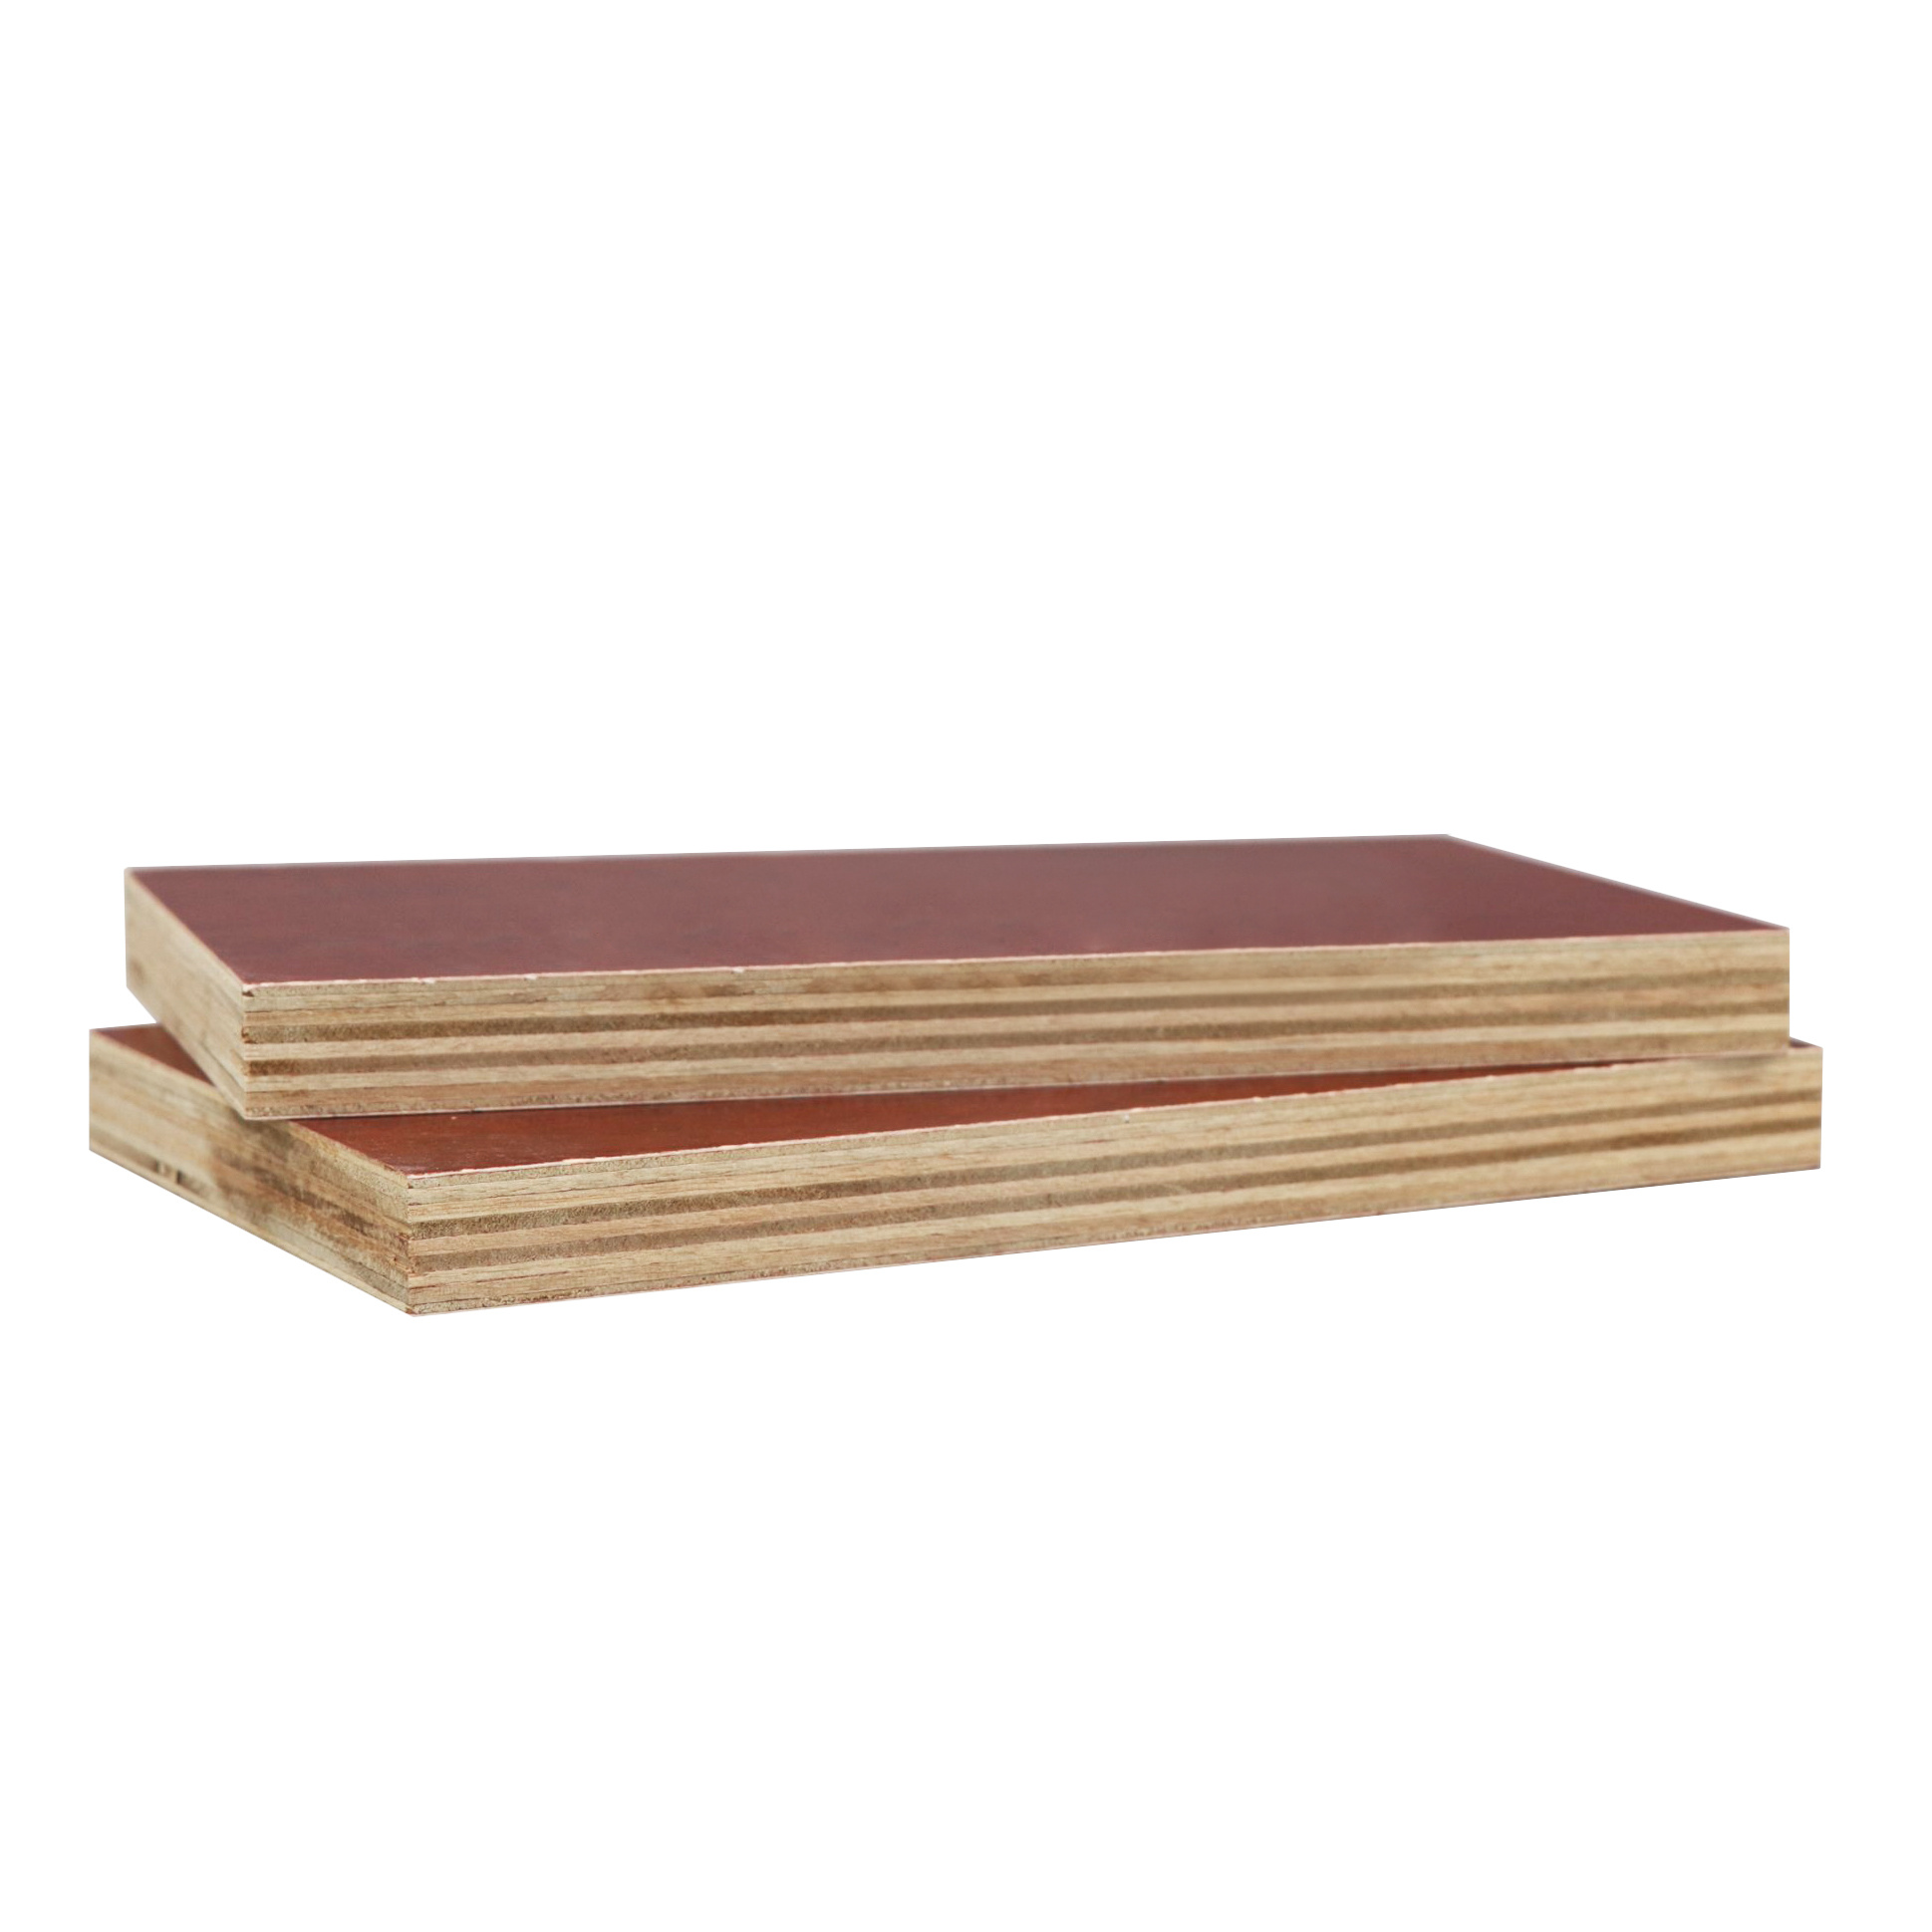 Factory Direct Red Melamine Plywood Woodgrain Board for Furniture